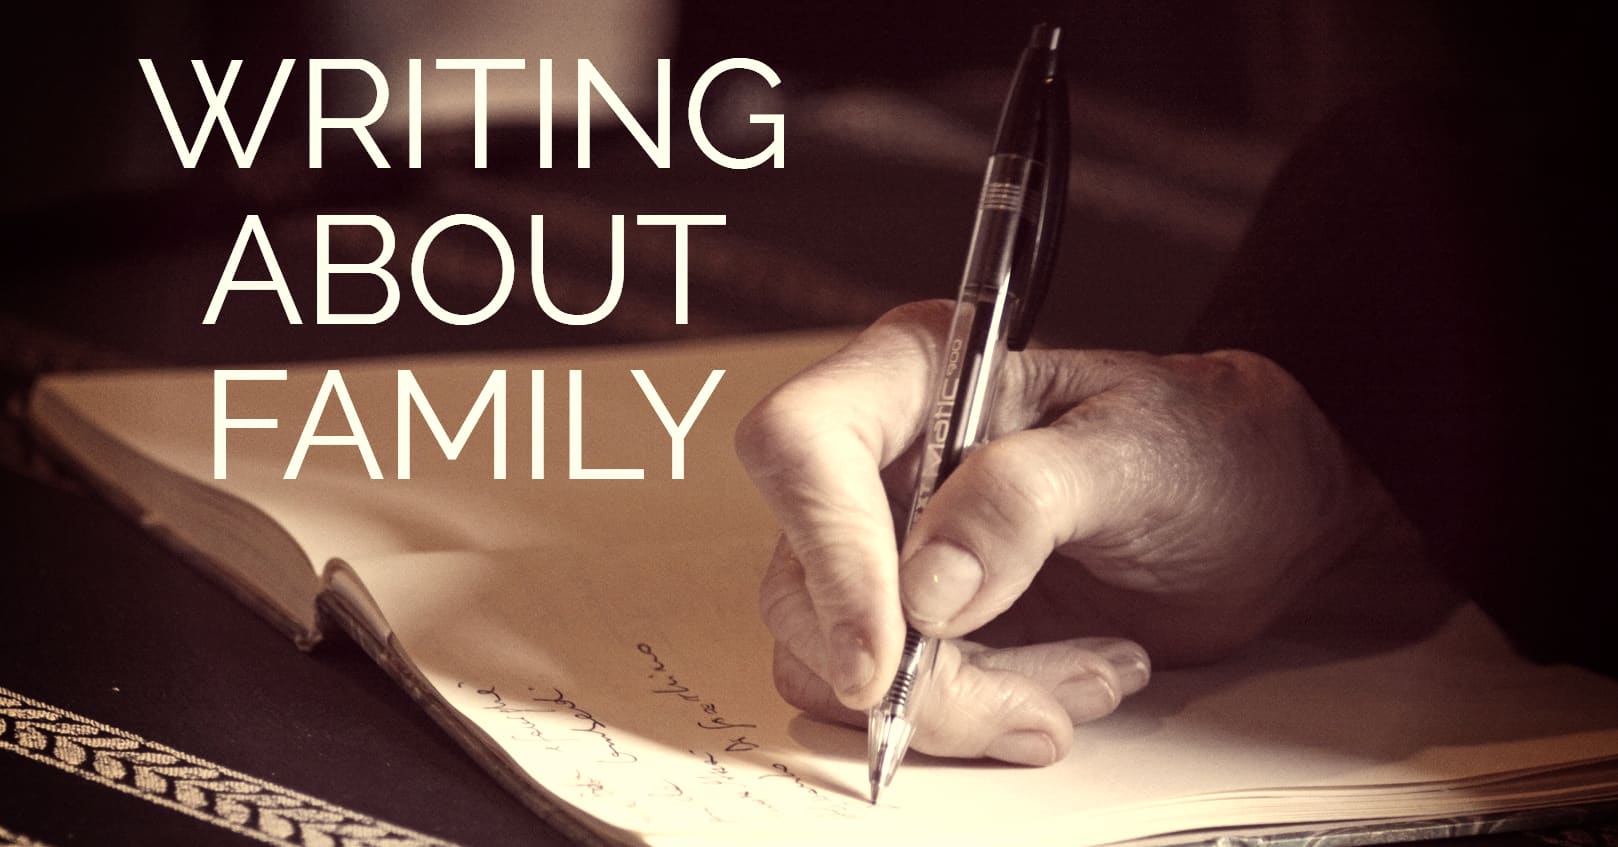 Writing About Family